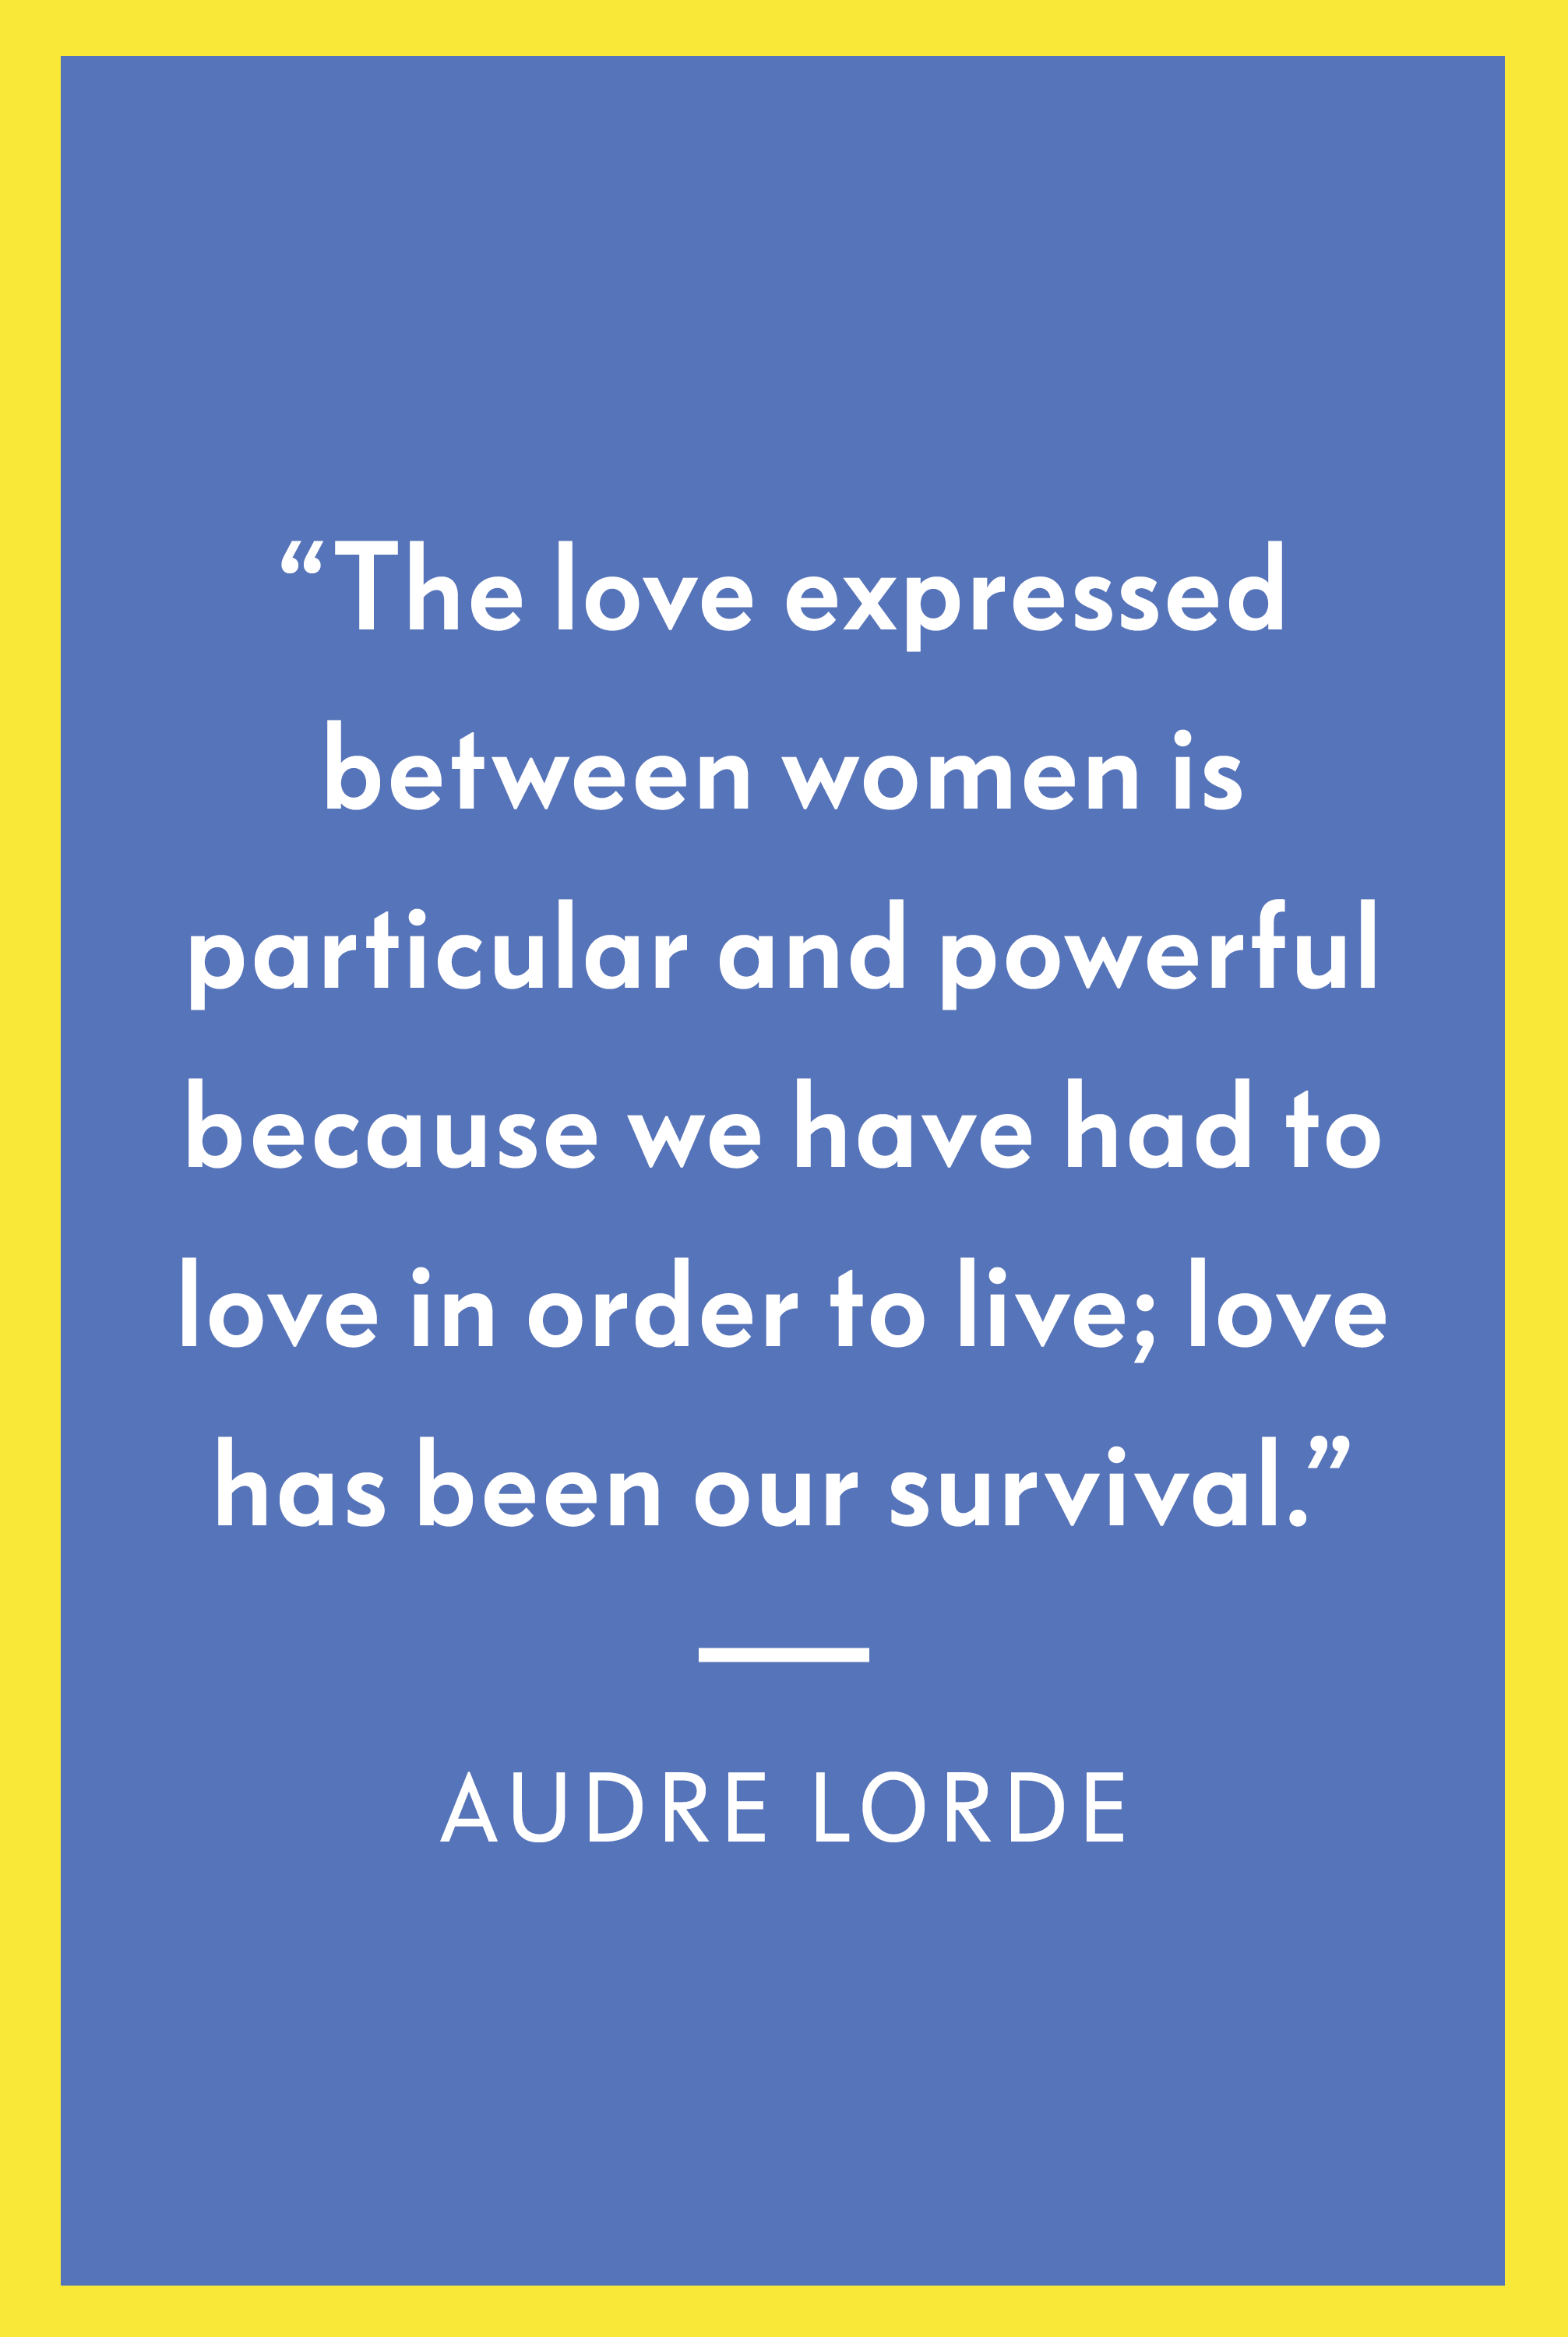 12 Audre Lorde Quotes About Self Care And Speaking Up